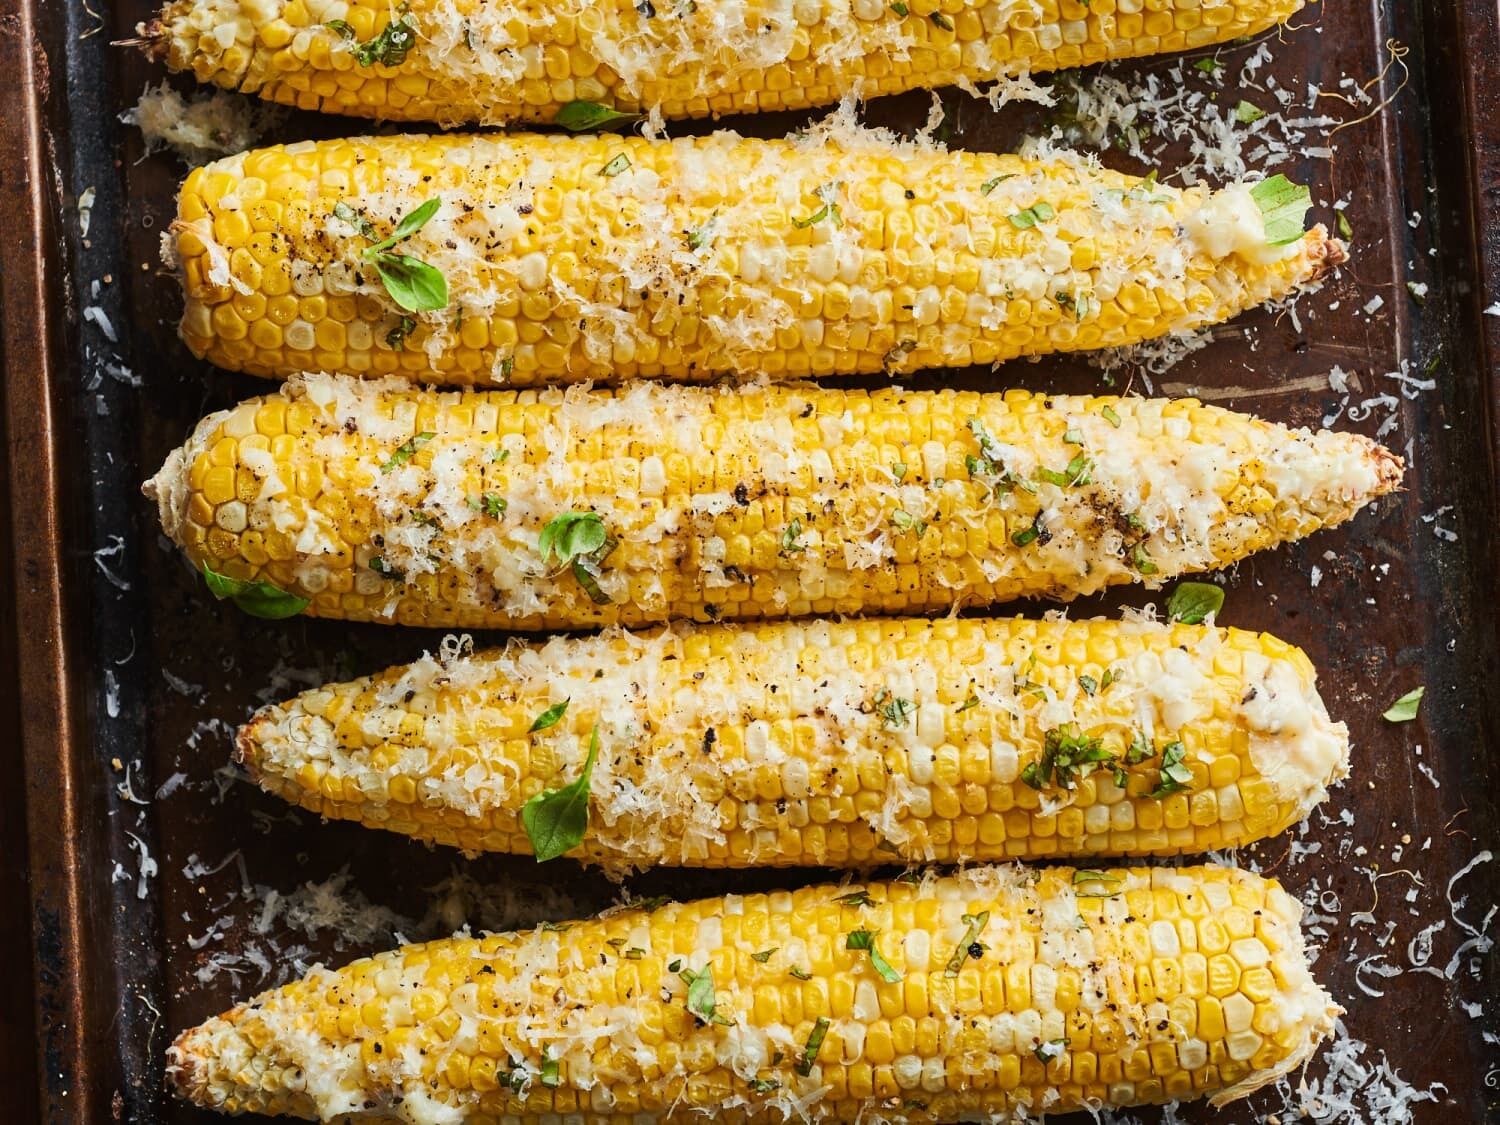 Baked corn in the oven